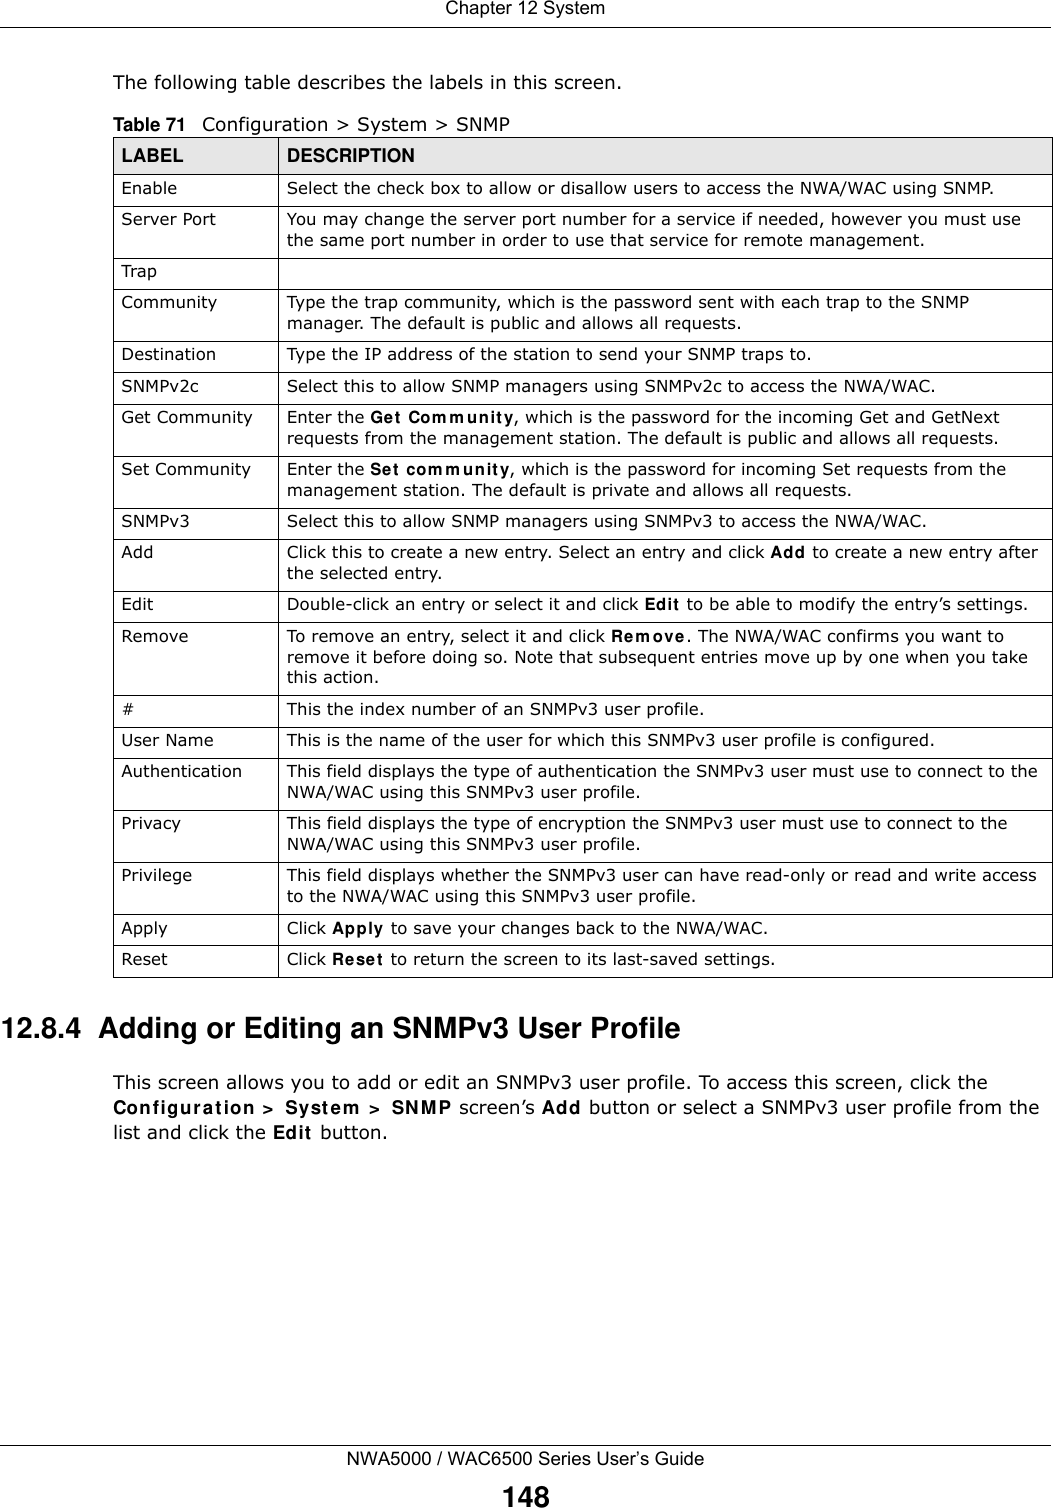 Chapter 12 SystemNWA5000 / WAC6500 Series User’s Guide148The following table describes the labels in this screen.  12.8.4  Adding or Editing an SNMPv3 User ProfileThis screen allows you to add or edit an SNMPv3 user profile. To access this screen, click the Configur at ion &gt;  Syst em  &gt;  SN M P screen’s Add button or select a SNMPv3 user profile from the list and click the Ed it  button.Table 71   Configuration &gt; System &gt; SNMPLABEL DESCRIPTIONEnable Select the check box to allow or disallow users to access the NWA/WAC using SNMP.Server Port You may change the server port number for a service if needed, however you must use the same port number in order to use that service for remote management.TrapCommunity Type the trap community, which is the password sent with each trap to the SNMP manager. The default is public and allows all requests.Destination Type the IP address of the station to send your SNMP traps to.SNMPv2c Select this to allow SNMP managers using SNMPv2c to access the NWA/WAC.Get Community Enter the Ge t  Com m unity, which is the password for the incoming Get and GetNext requests from the management station. The default is public and allows all requests.Set Community Enter the Set  com m u n ity, which is the password for incoming Set requests from the management station. The default is private and allows all requests.SNMPv3 Select this to allow SNMP managers using SNMPv3 to access the NWA/WAC.Add Click this to create a new entry. Select an entry and click Add to create a new entry after the selected entry.Edit Double-click an entry or select it and click Edit  to be able to modify the entry’s settings. Remove To remove an entry, select it and click Re m ove. The NWA/WAC confirms you want to remove it before doing so. Note that subsequent entries move up by one when you take this action.#This the index number of an SNMPv3 user profile.User Name This is the name of the user for which this SNMPv3 user profile is configured.Authentication This field displays the type of authentication the SNMPv3 user must use to connect to the NWA/WAC using this SNMPv3 user profile.Privacy This field displays the type of encryption the SNMPv3 user must use to connect to the NWA/WAC using this SNMPv3 user profile.Privilege This field displays whether the SNMPv3 user can have read-only or read and write access to the NWA/WAC using this SNMPv3 user profile.Apply Click Apply to save your changes back to the NWA/WAC. Reset Click Reset to return the screen to its last-saved settings. 